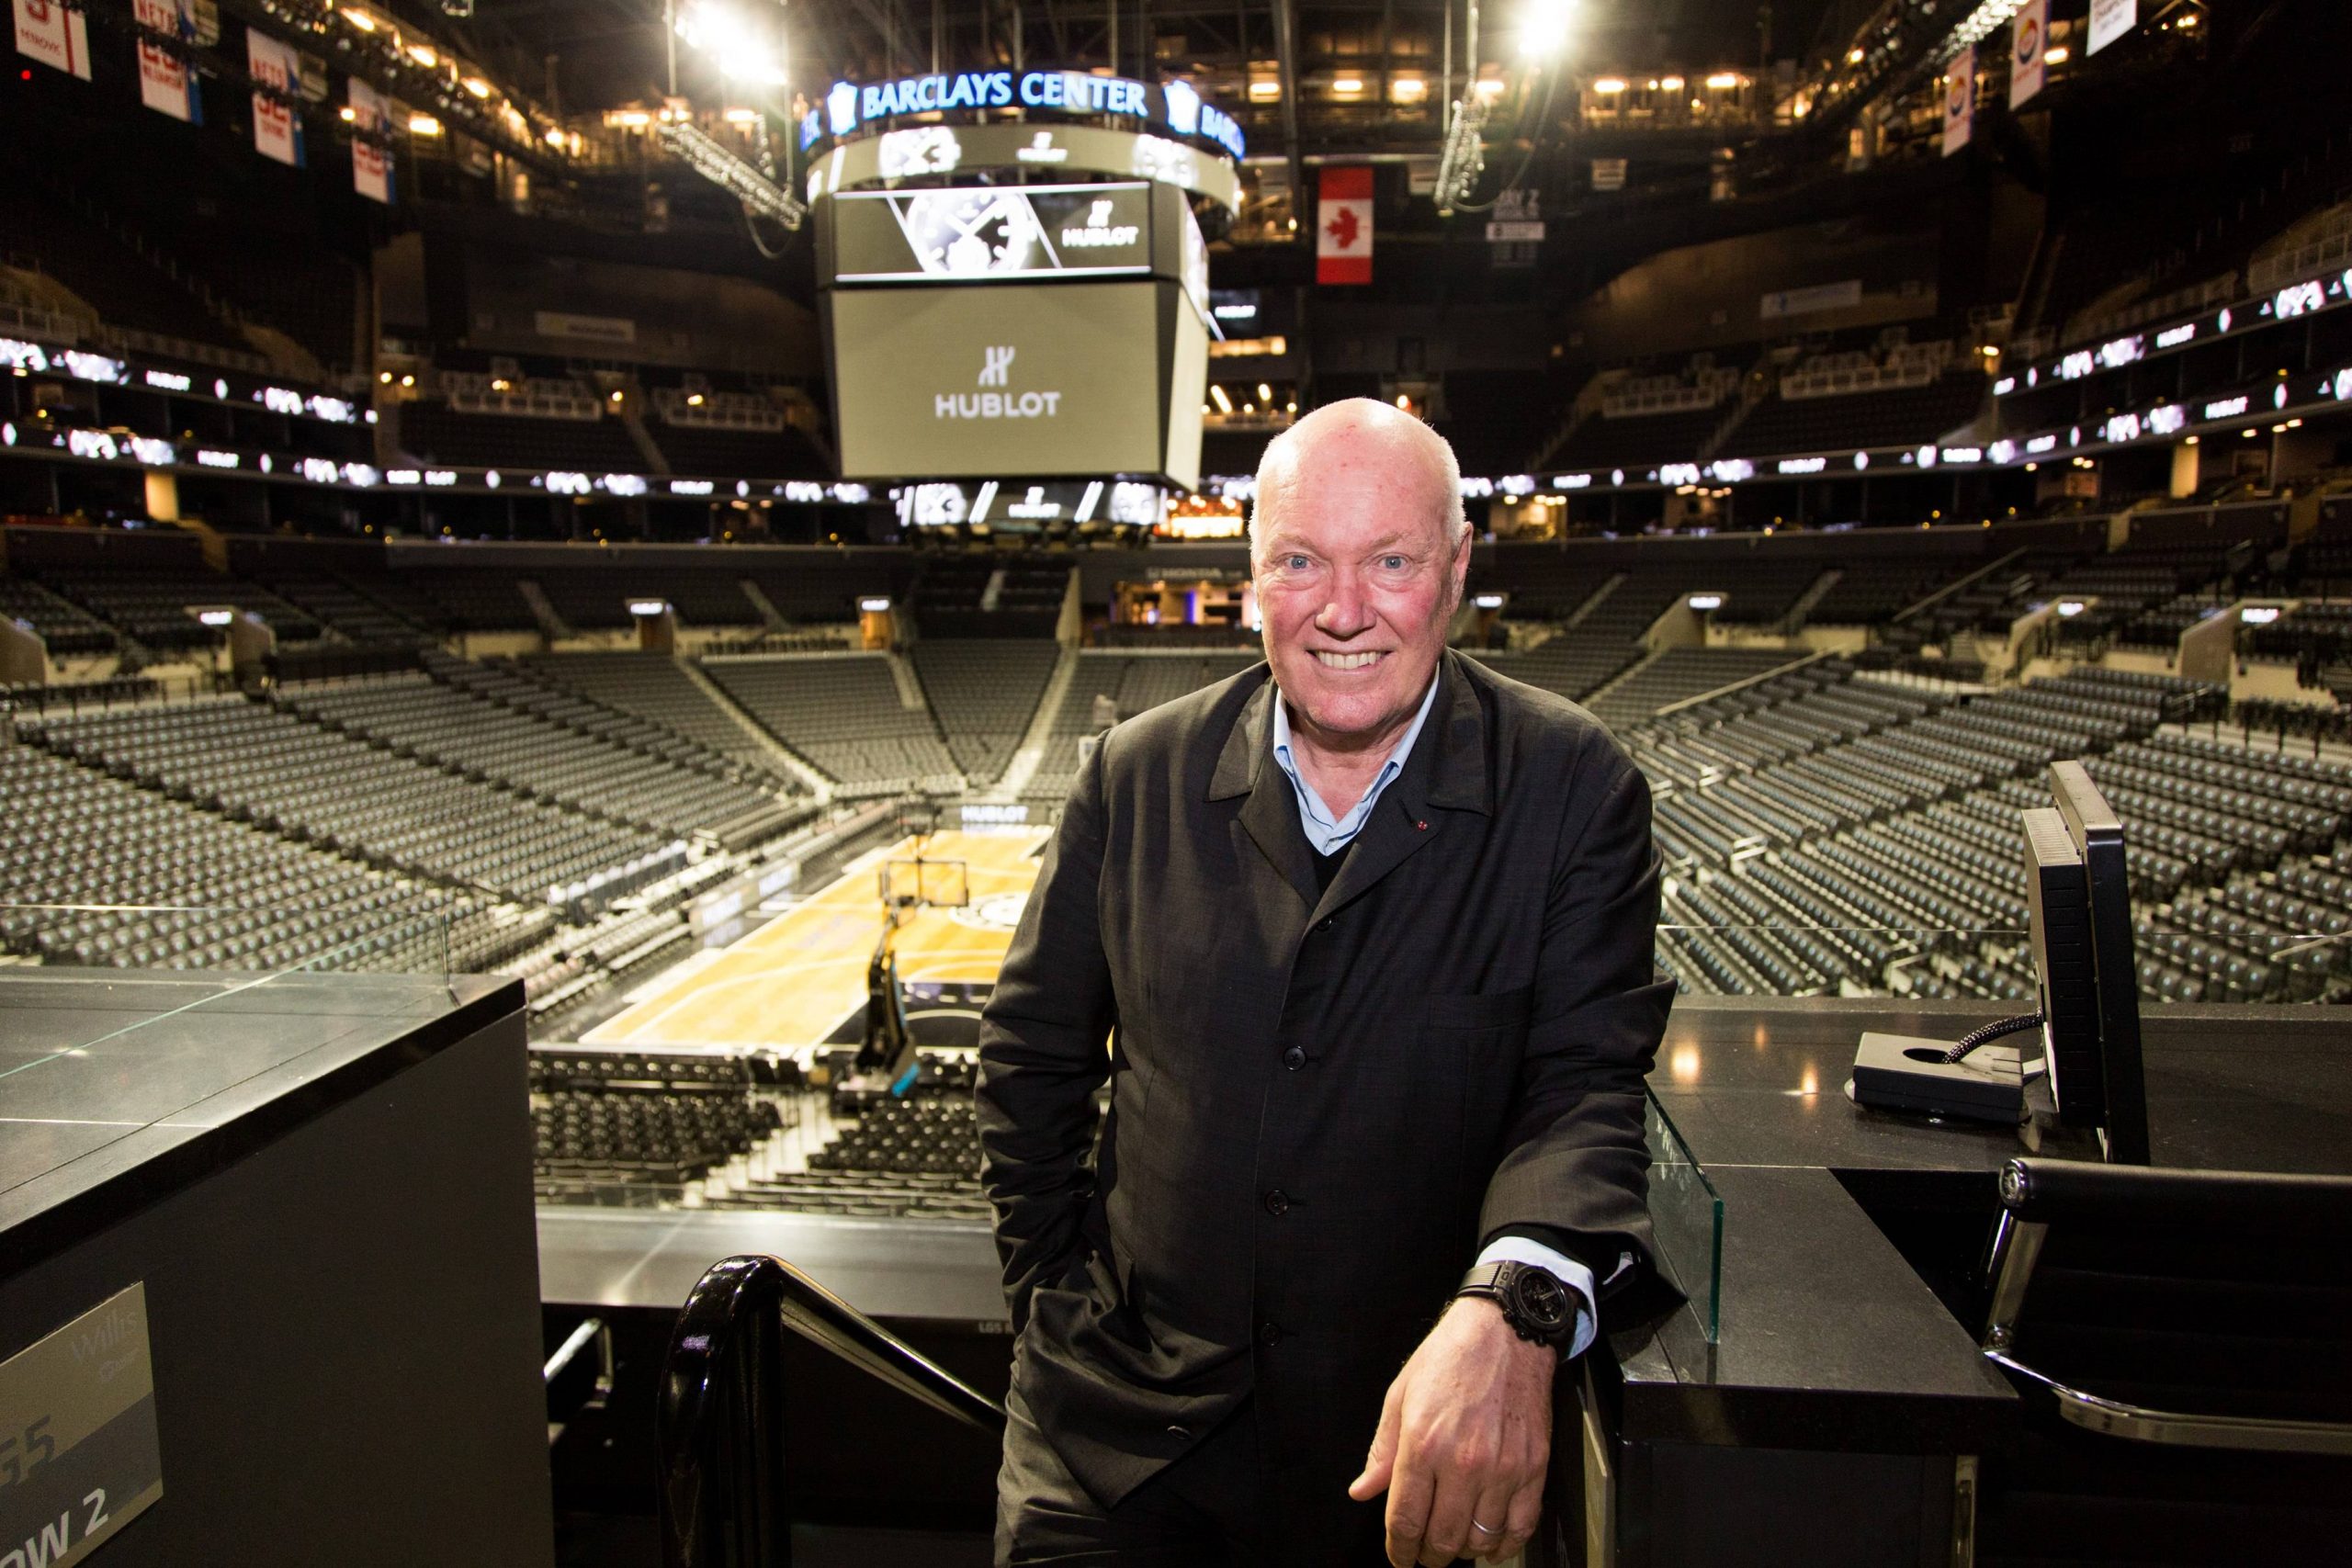 Hublot’s Jean-Claude Biver Teams Up With Nets Coach Jason Kidd for Watch Lovers’ Dinner